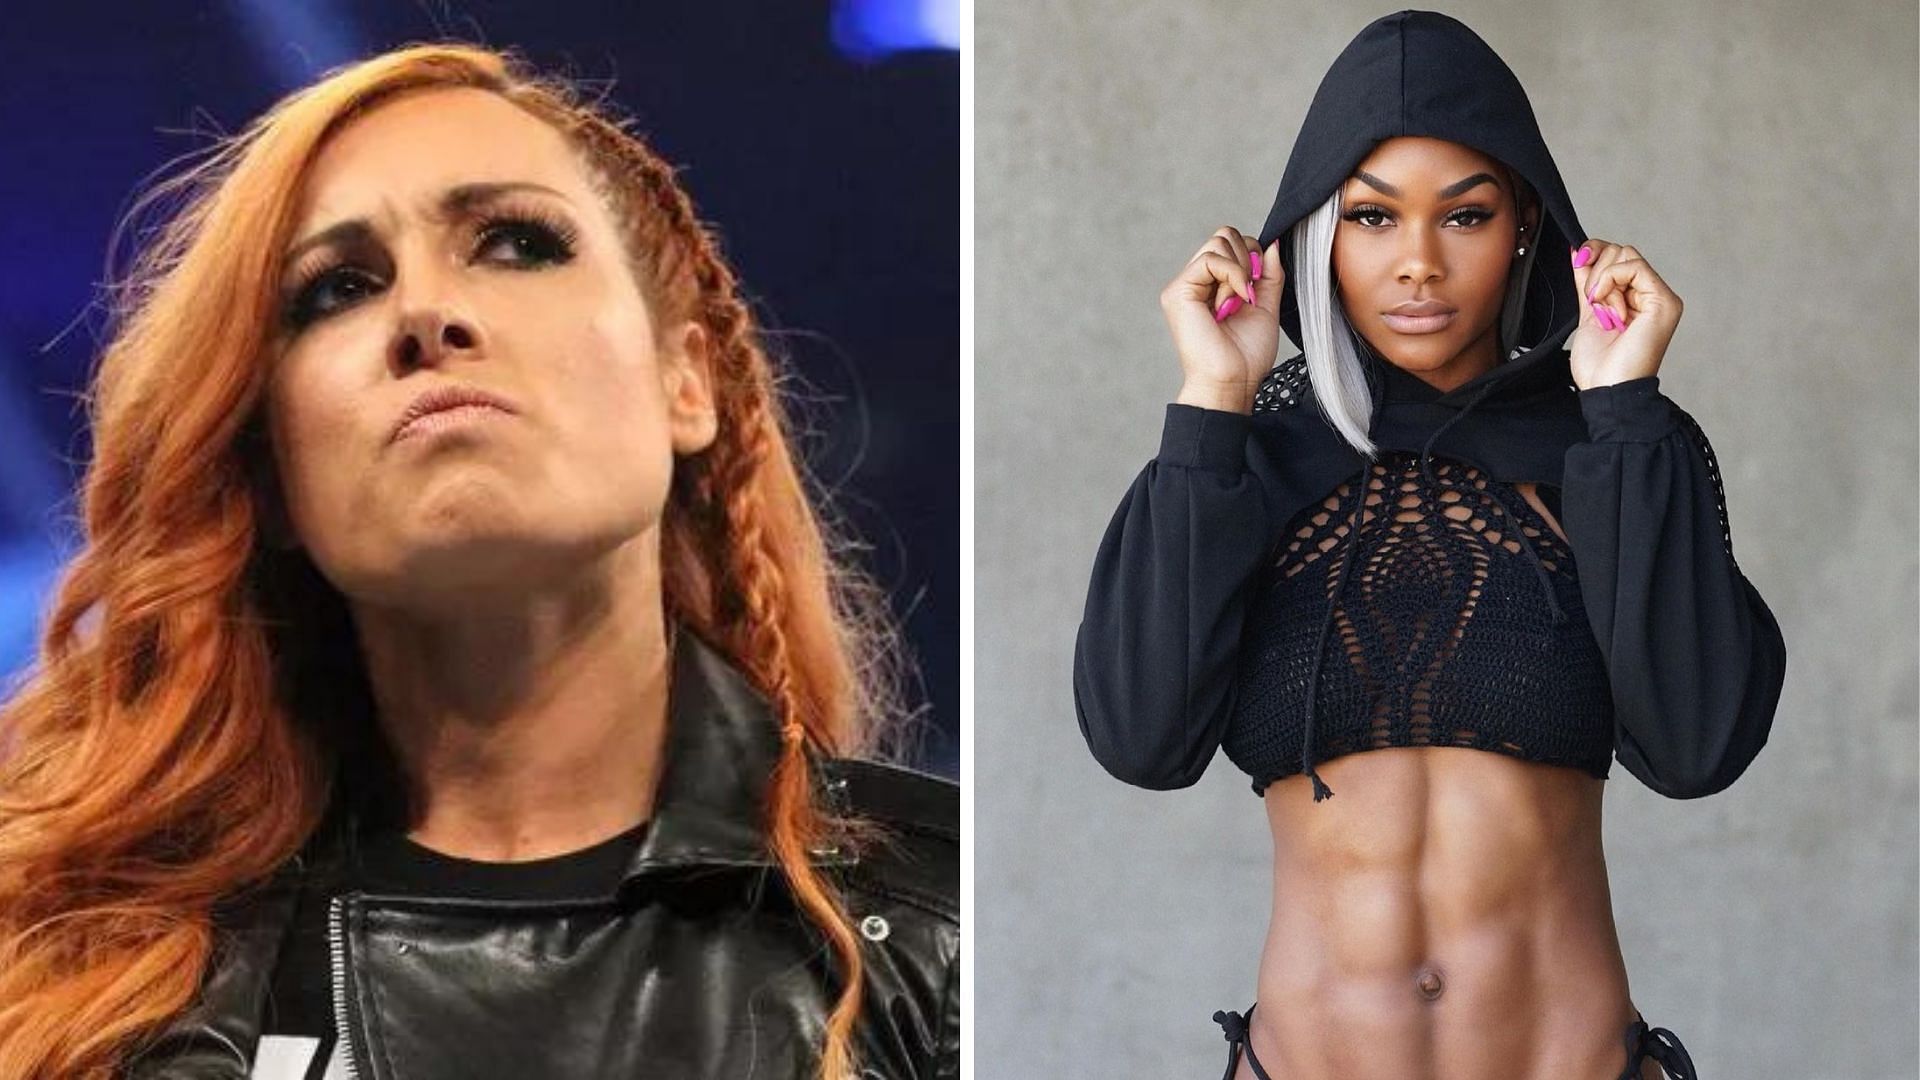 Becky Lynch on the left and Jade Cargill on the right